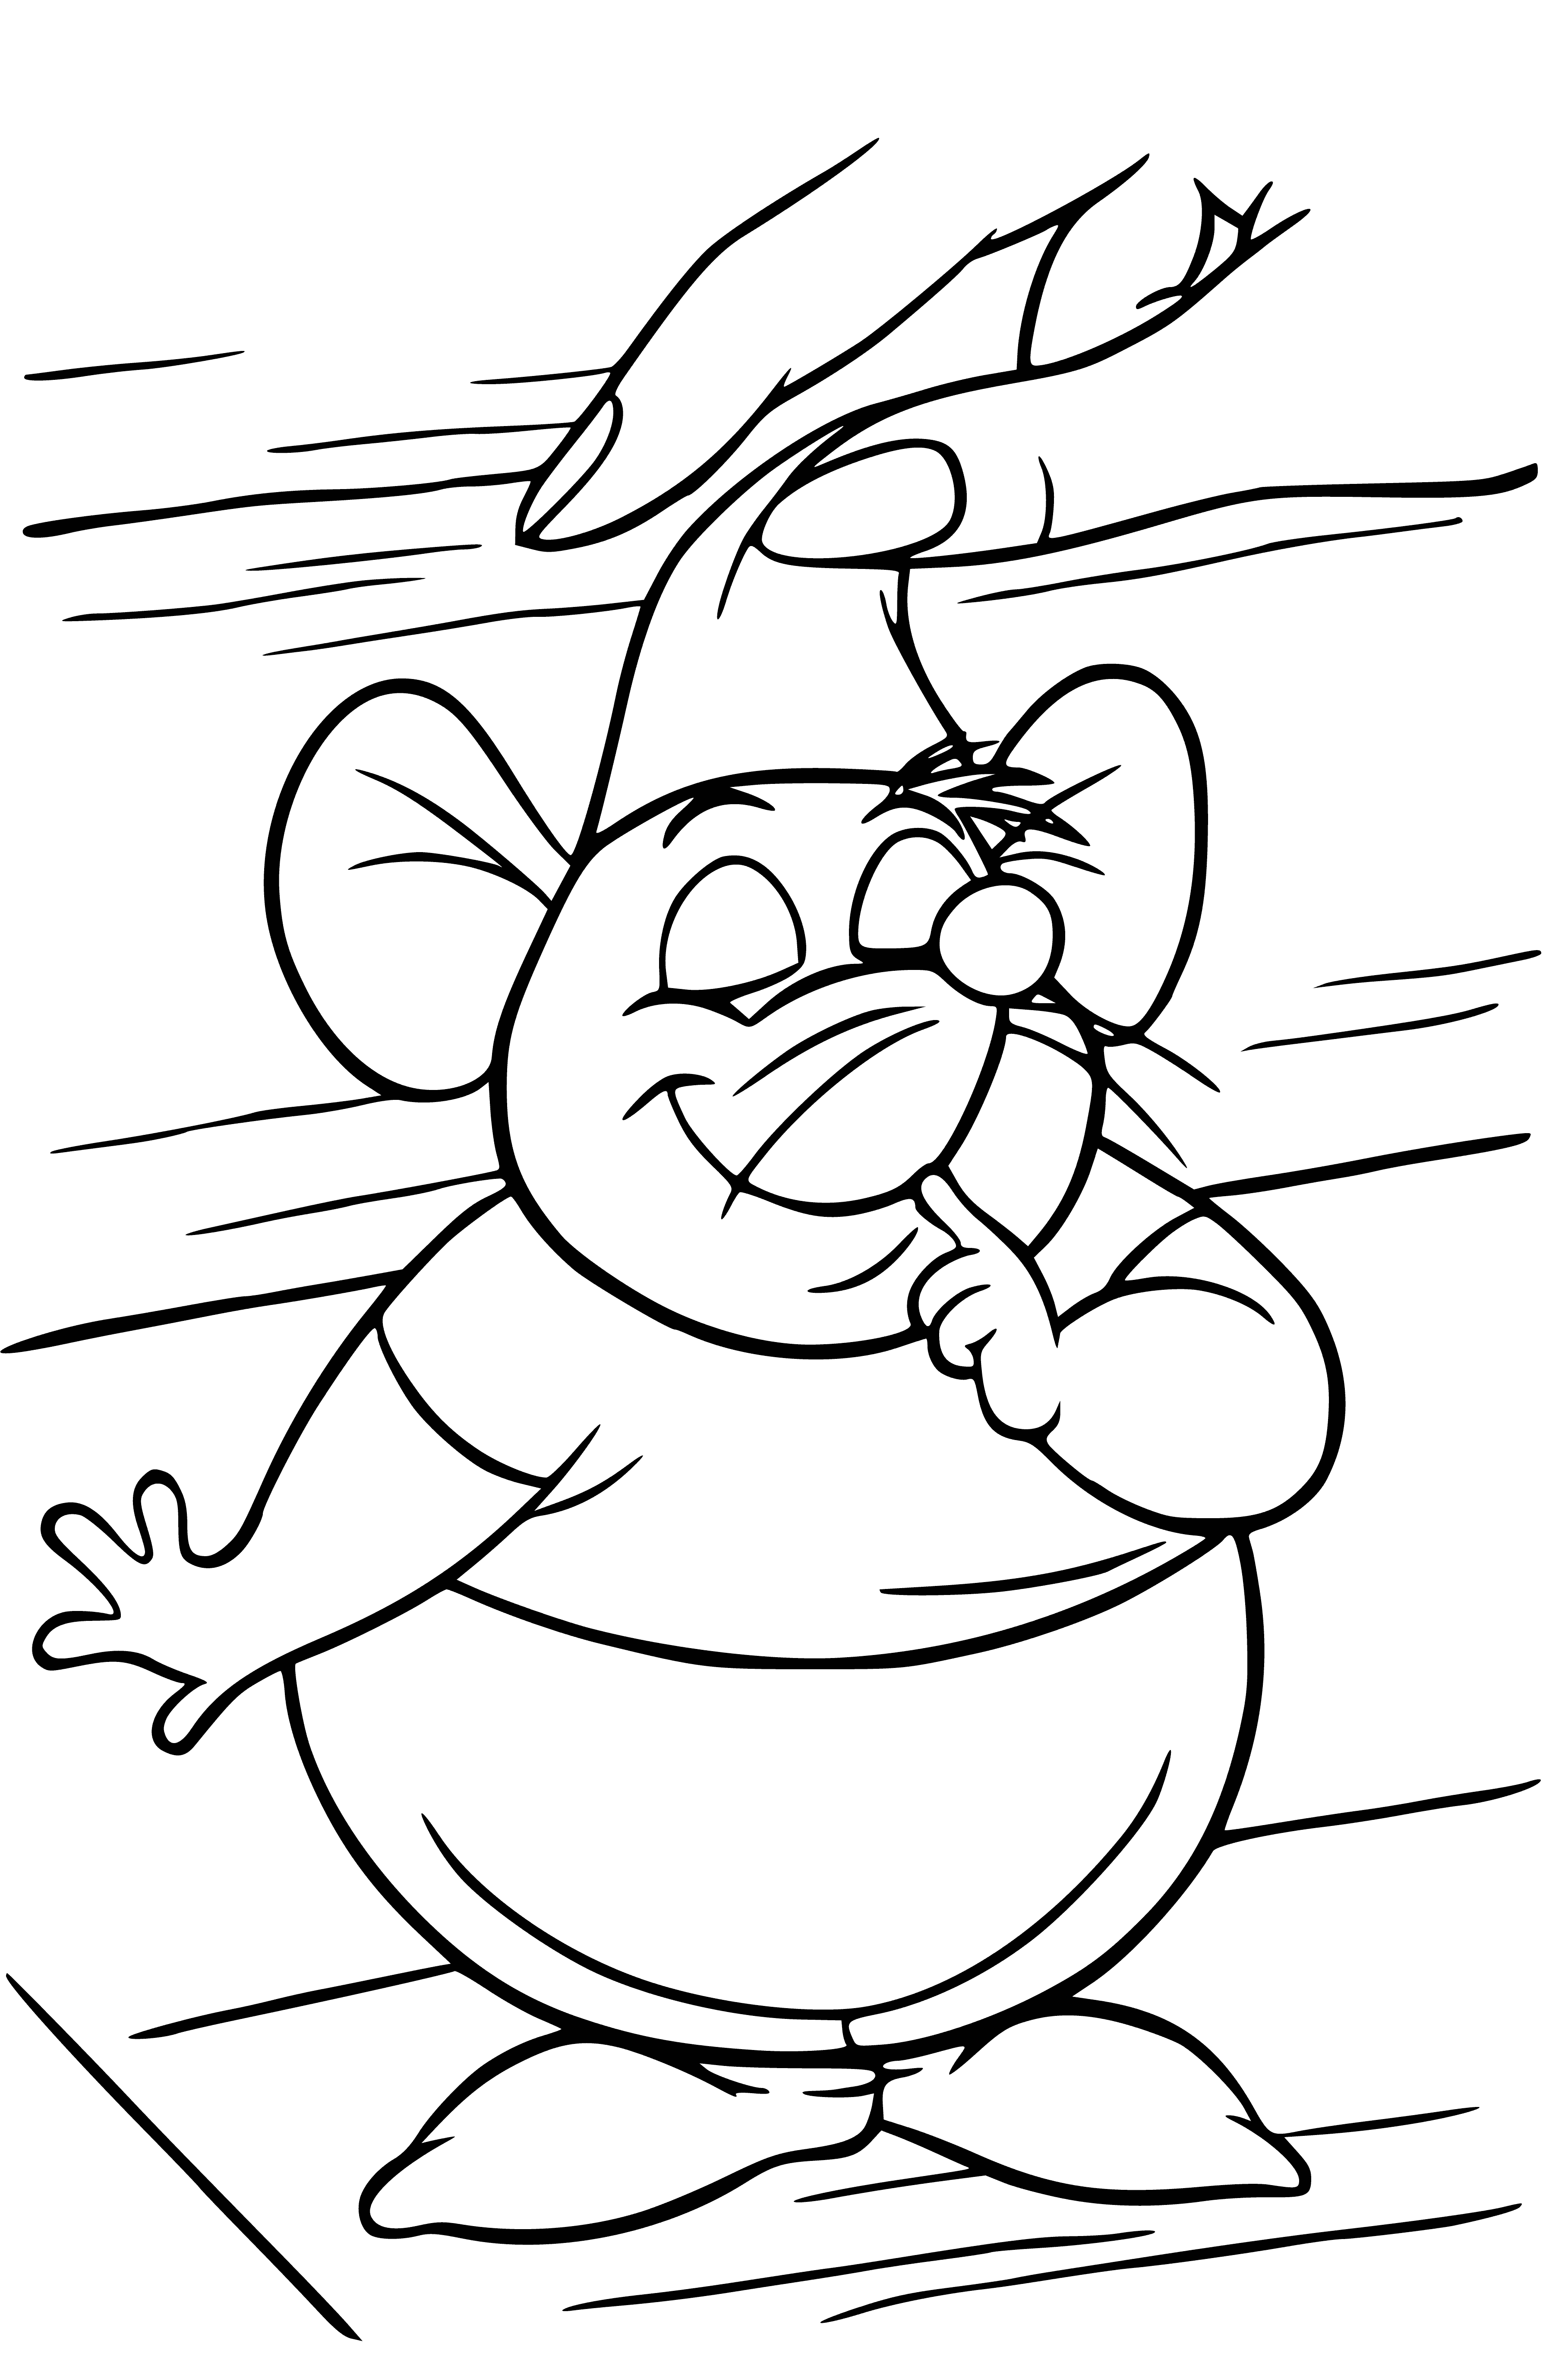 coloring page: Cinderella feeds a tiny mouse, wearing a cap, with a kind expression on her face.